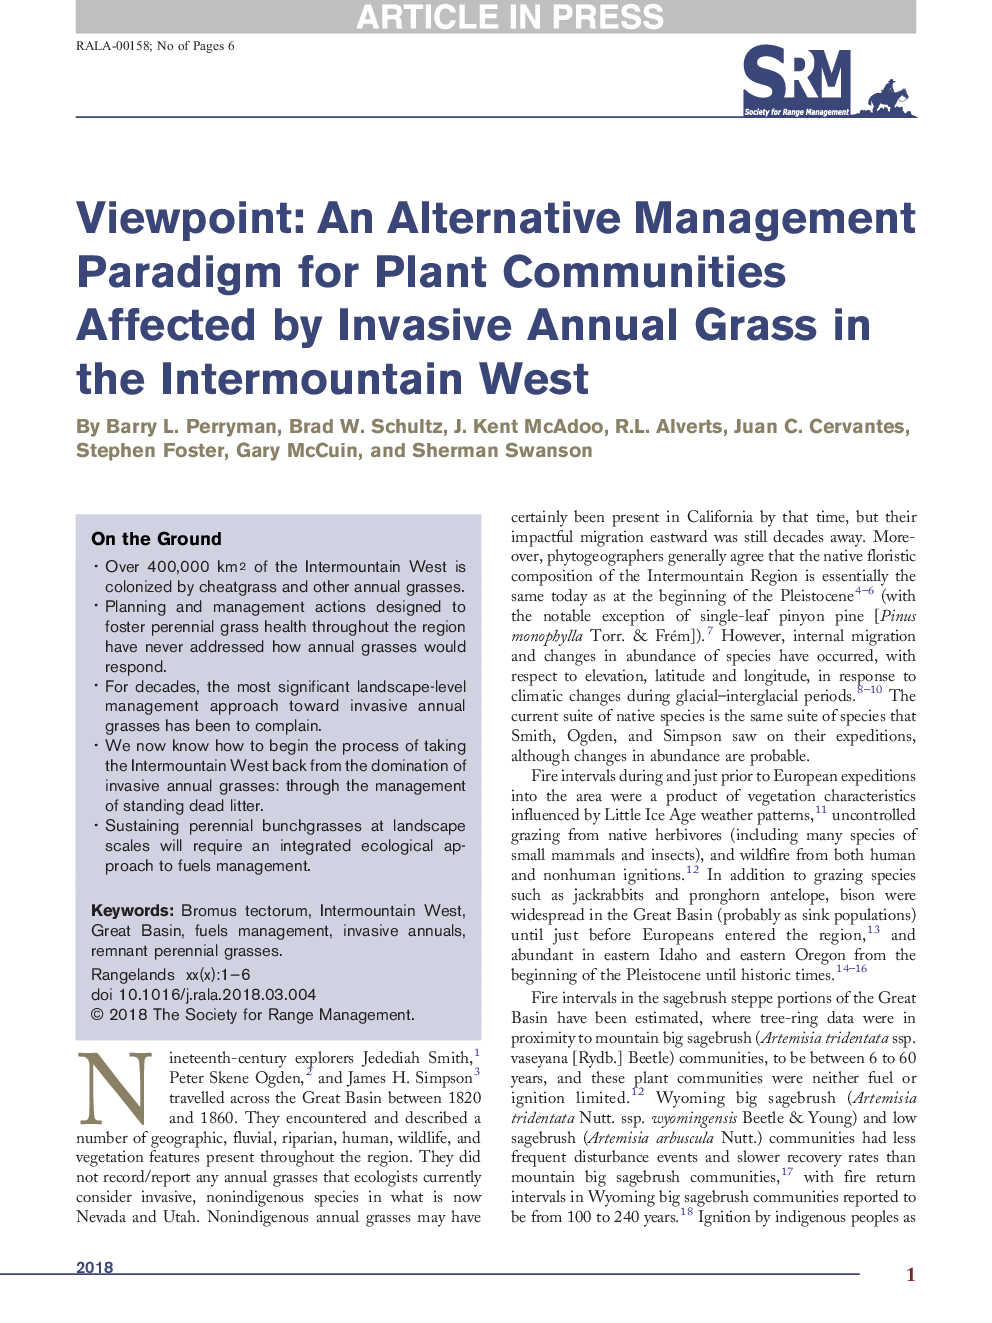 Viewpoint: An Alternative Management Paradigm for Plant Communities Affected by Invasive Annual Grass in the Intermountain West